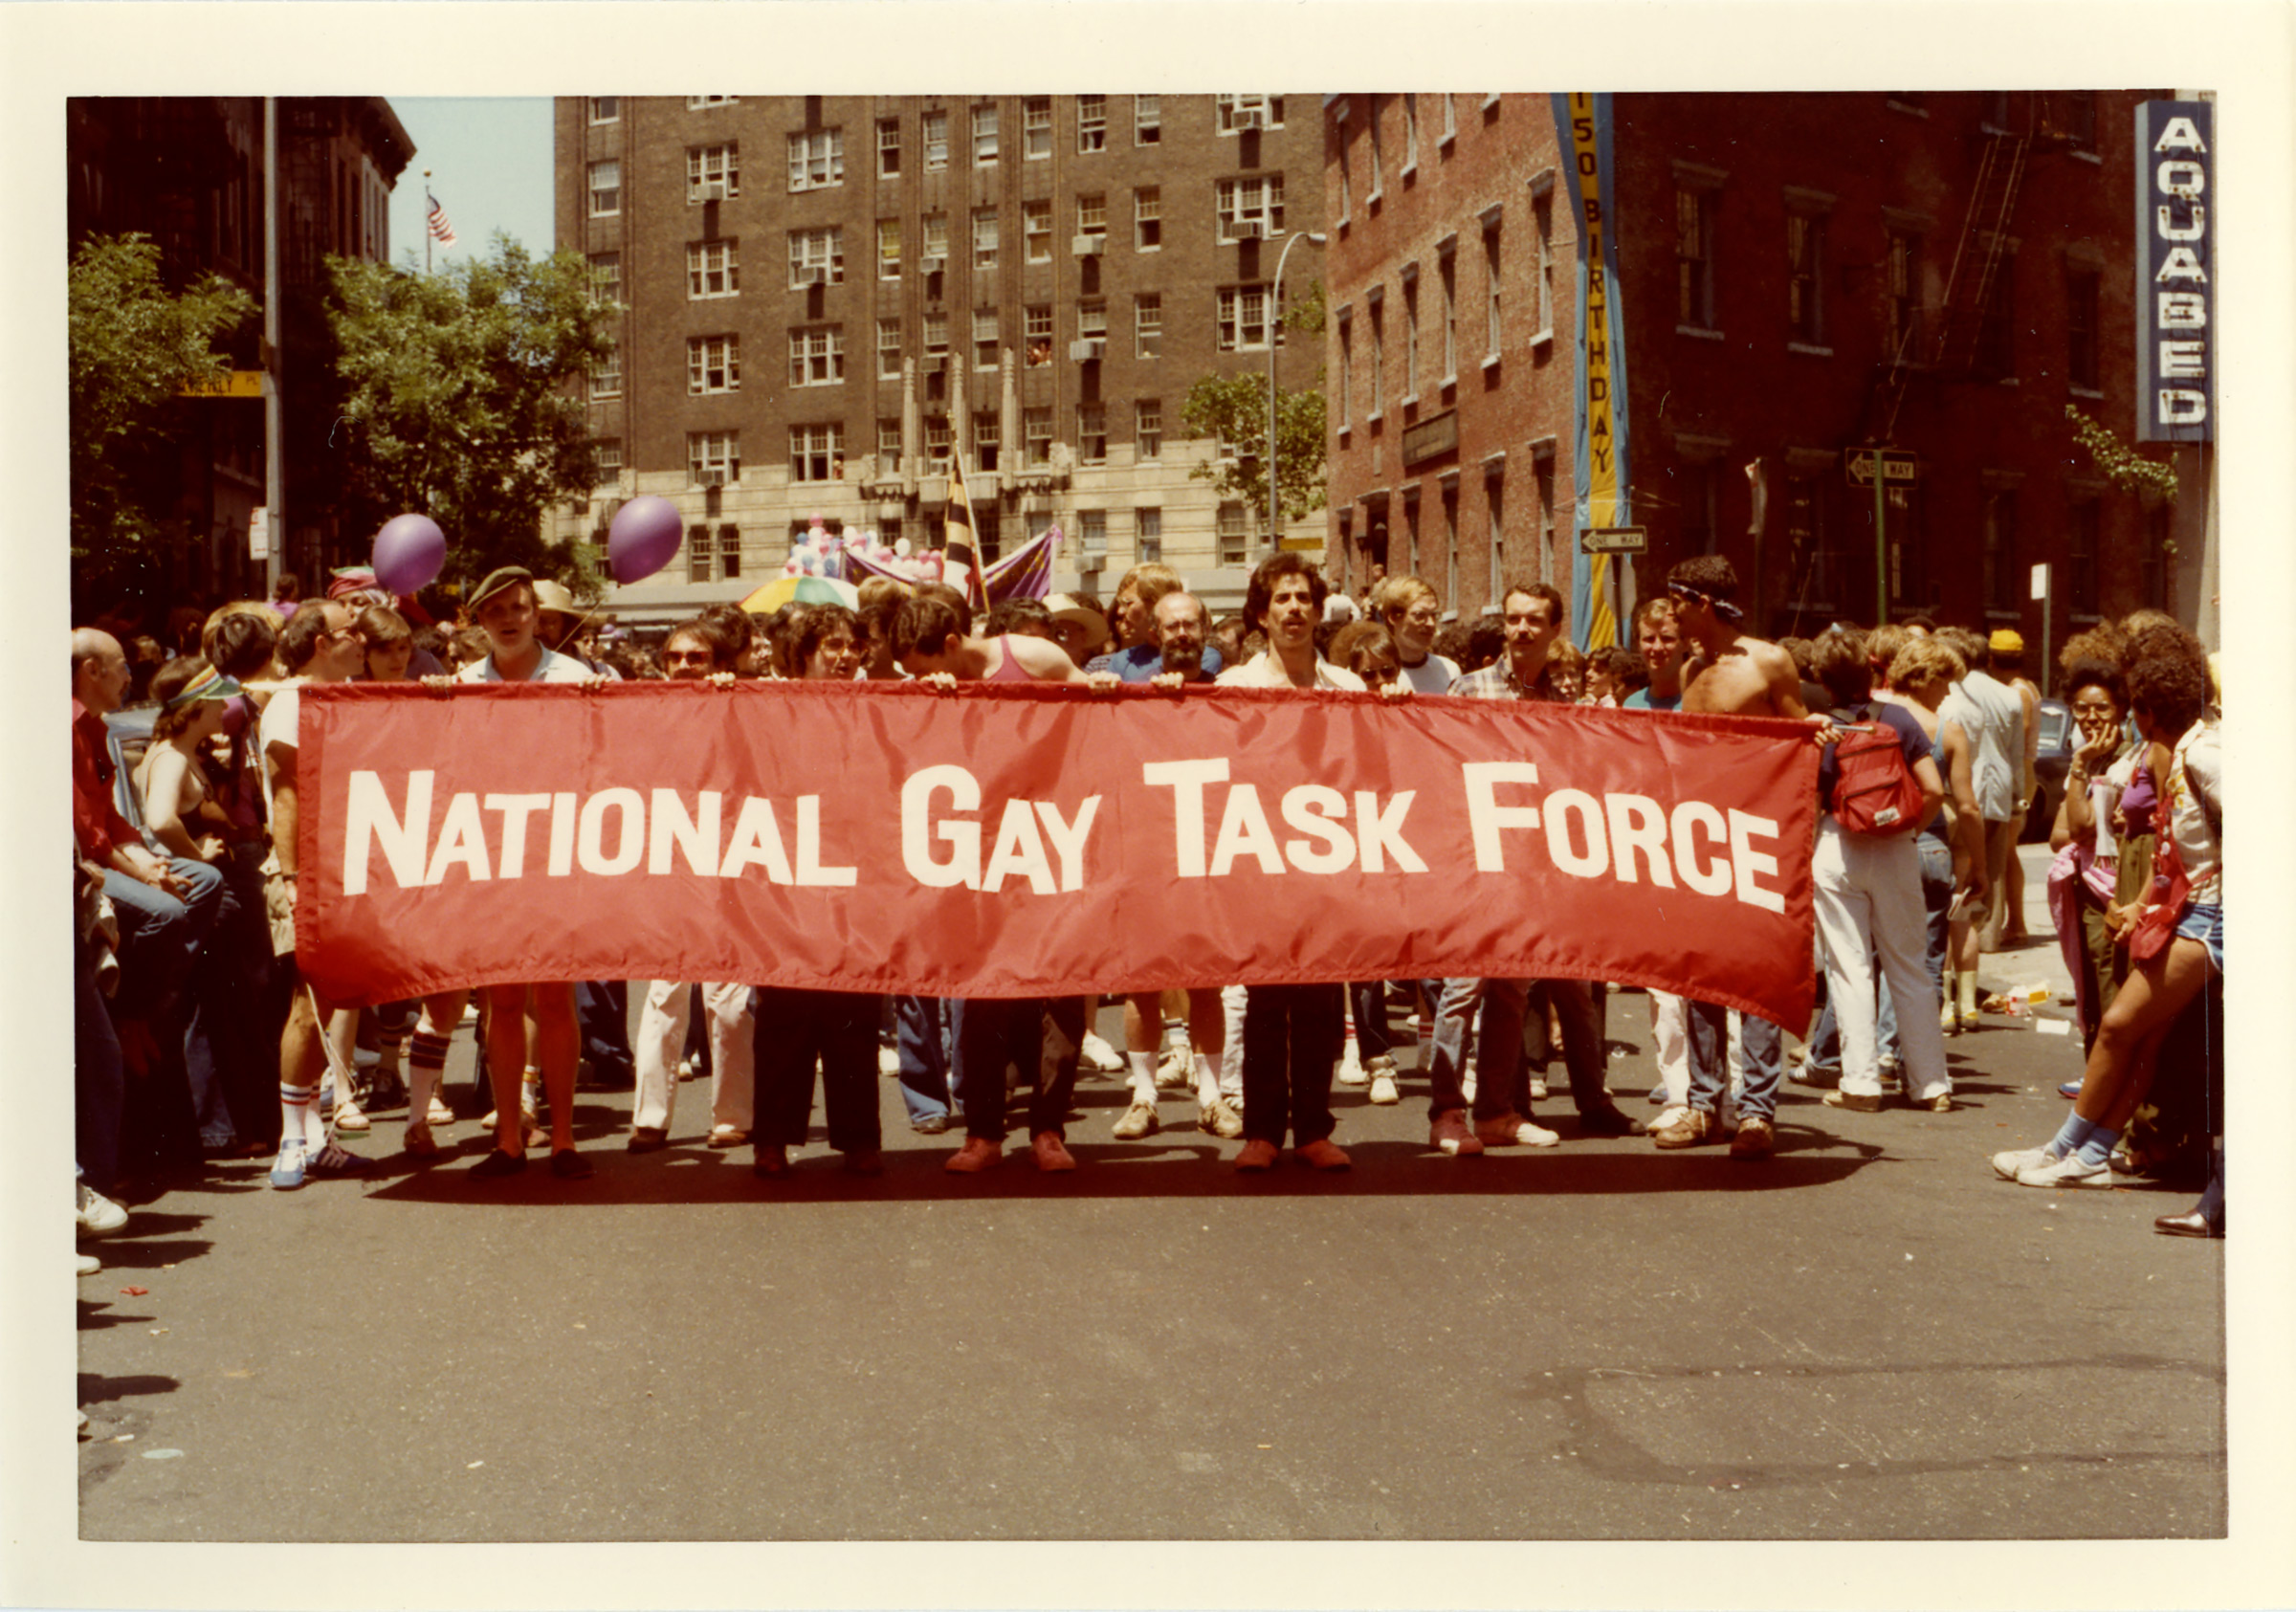 Members of the National Gay Task Force march in 1981 (Courtesy of the Estate of George Dudley and the Leslie-Lohman Museum)